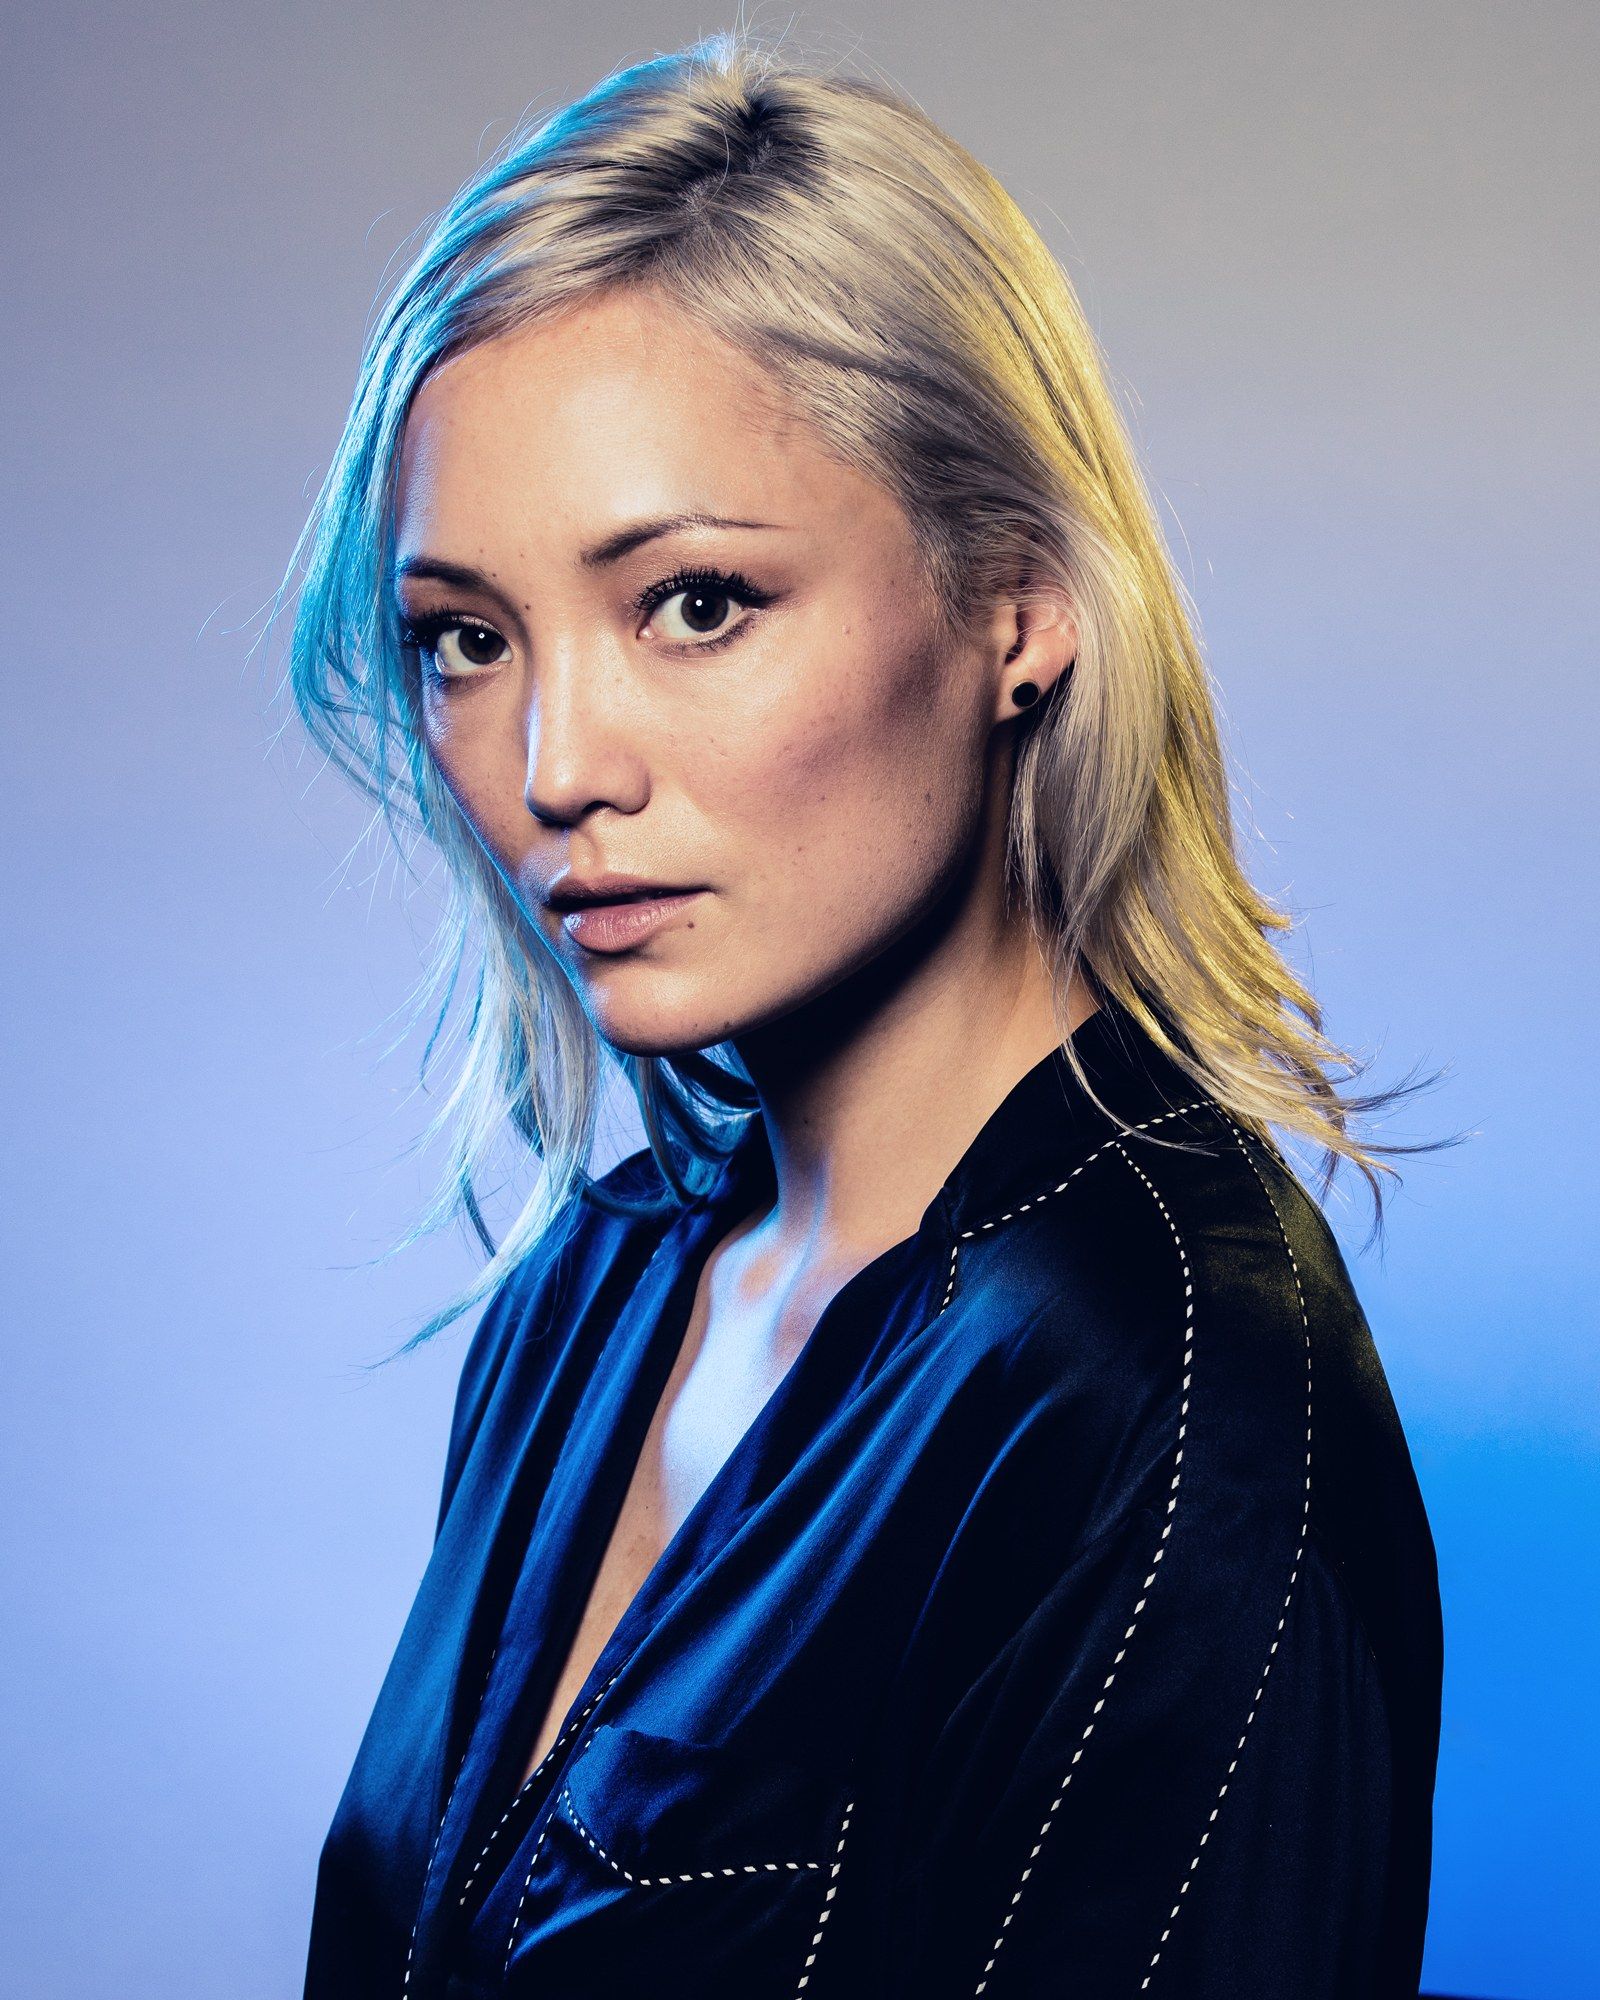 Pakistan Intuition Temerity Pom Klementieff - Hot Pom Klementieff Photos | Nude Pom Klementieff -  Barnorama / Pom alexandra klementieff (born 3 may 1986) is a french actress  and model. - flugellon